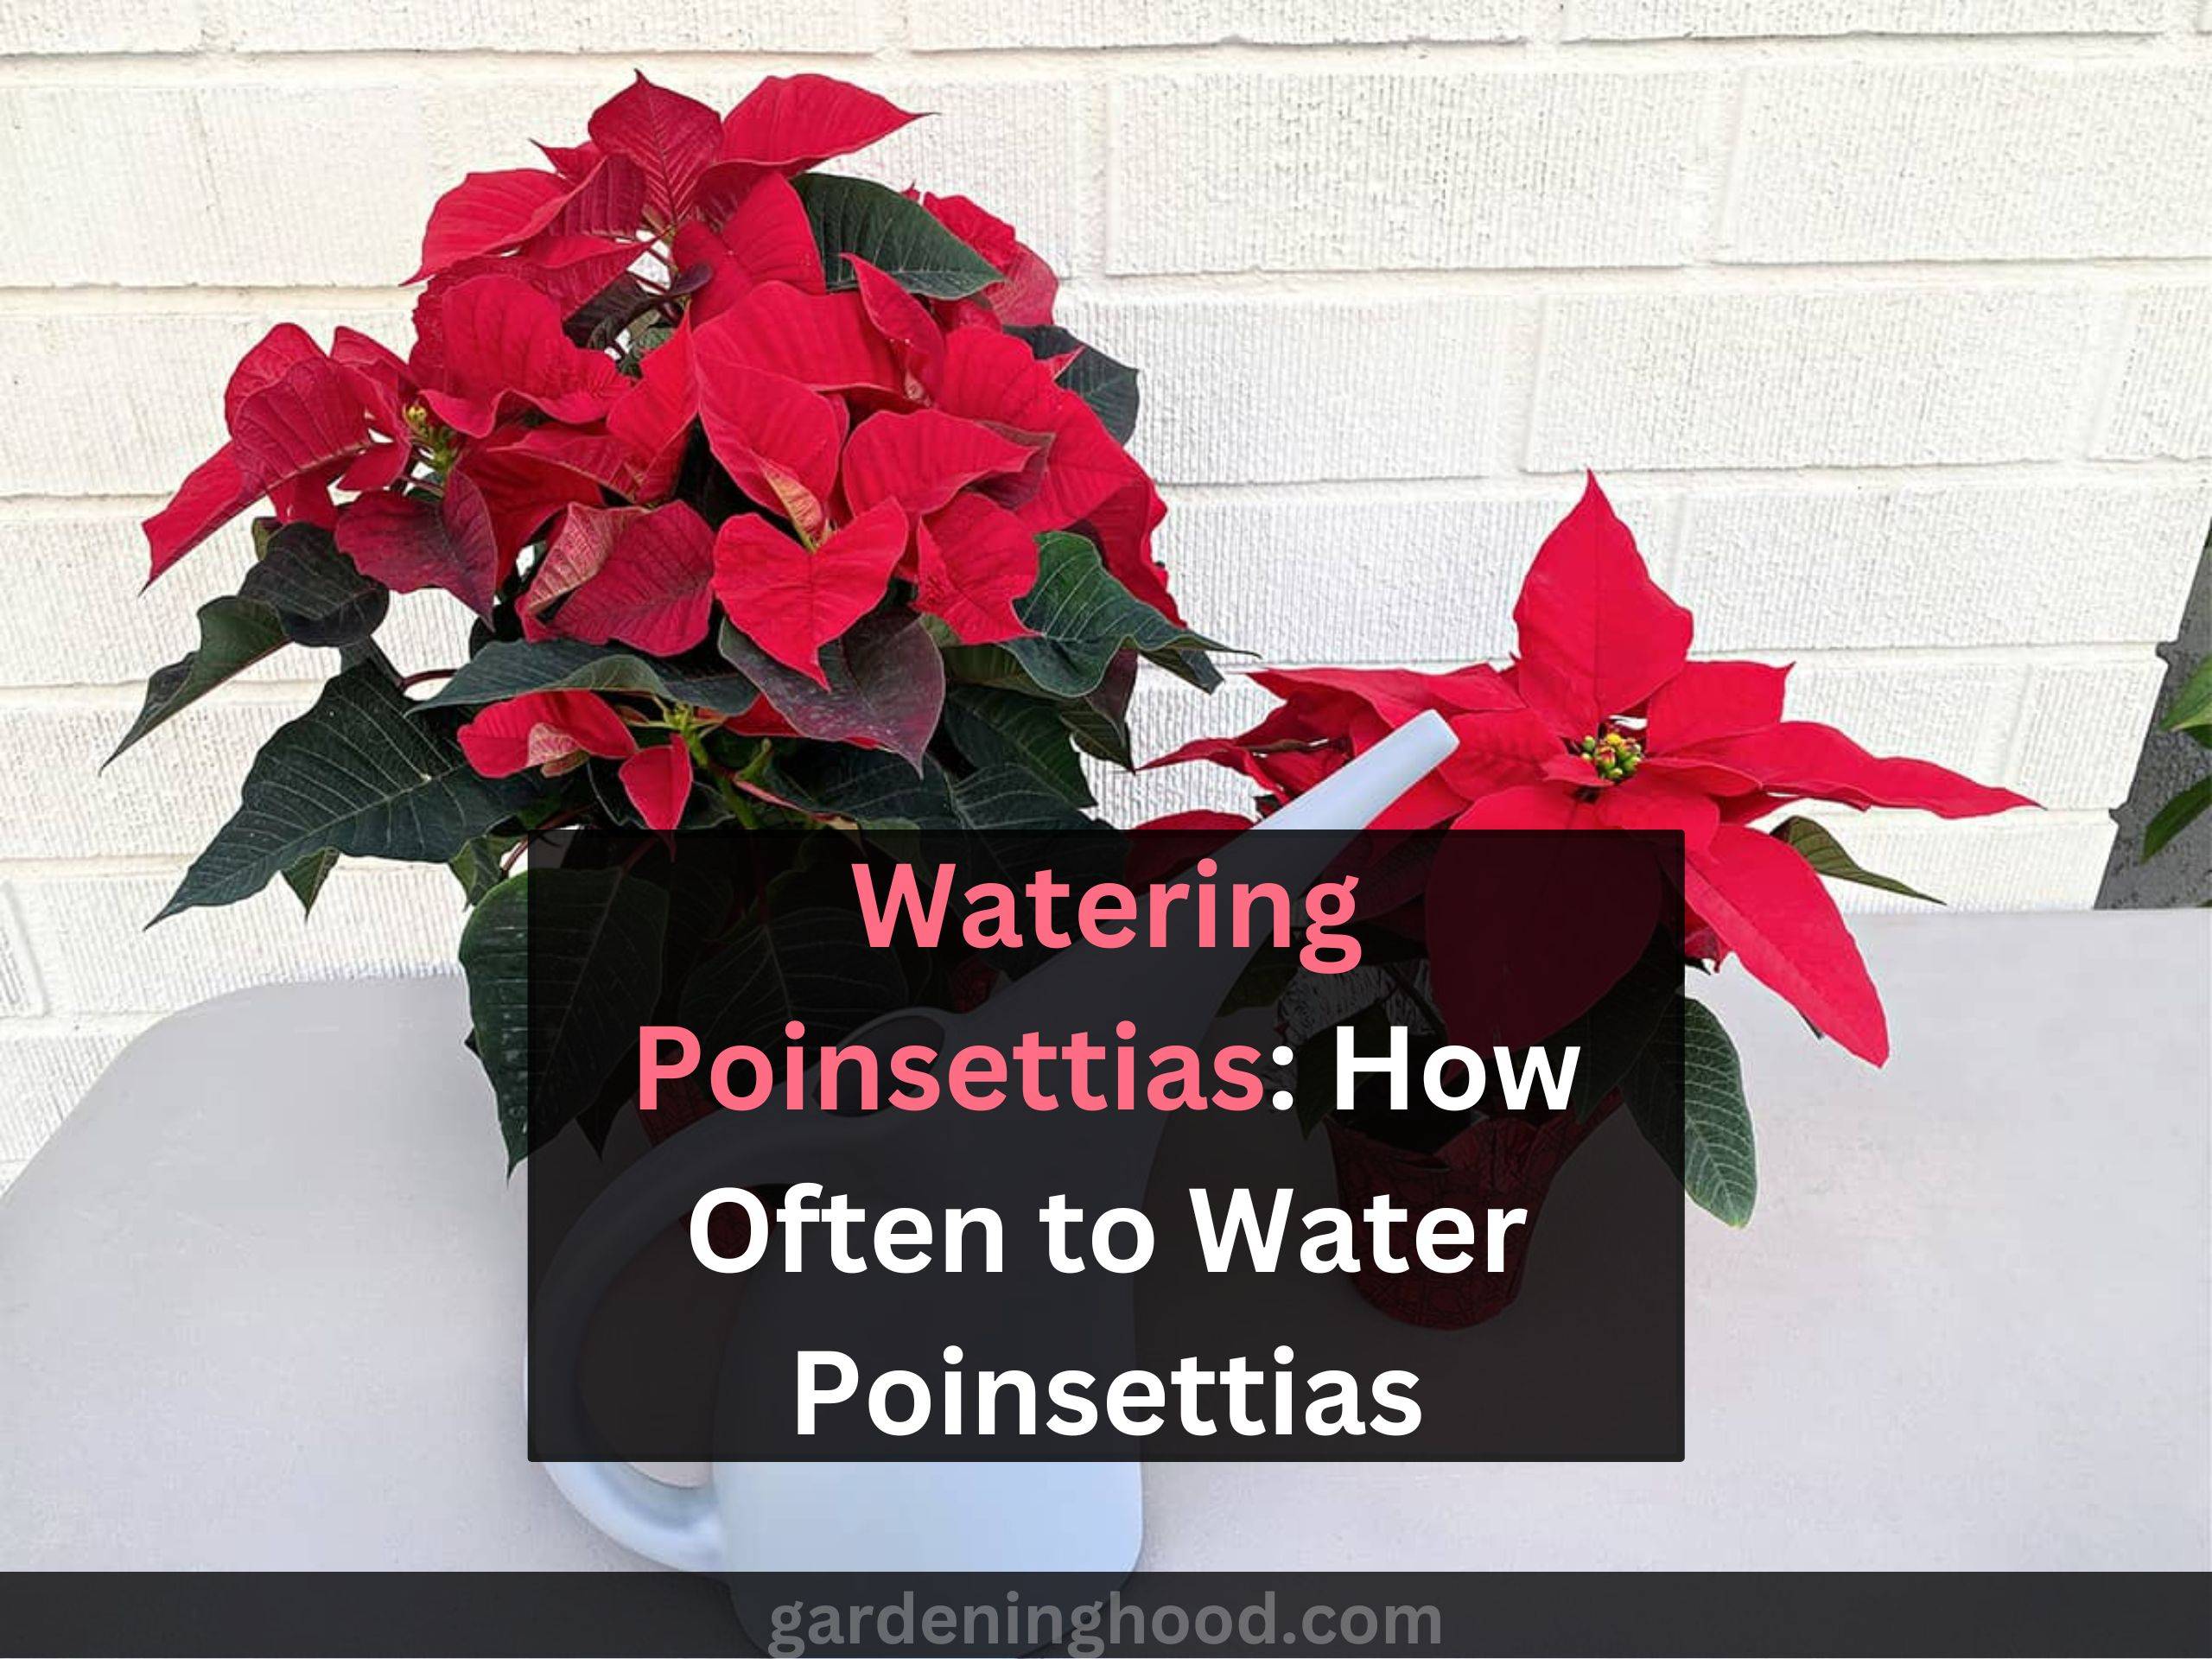 Watering Poinsettias: How Often to Water Poinsettias ( Caring tips)